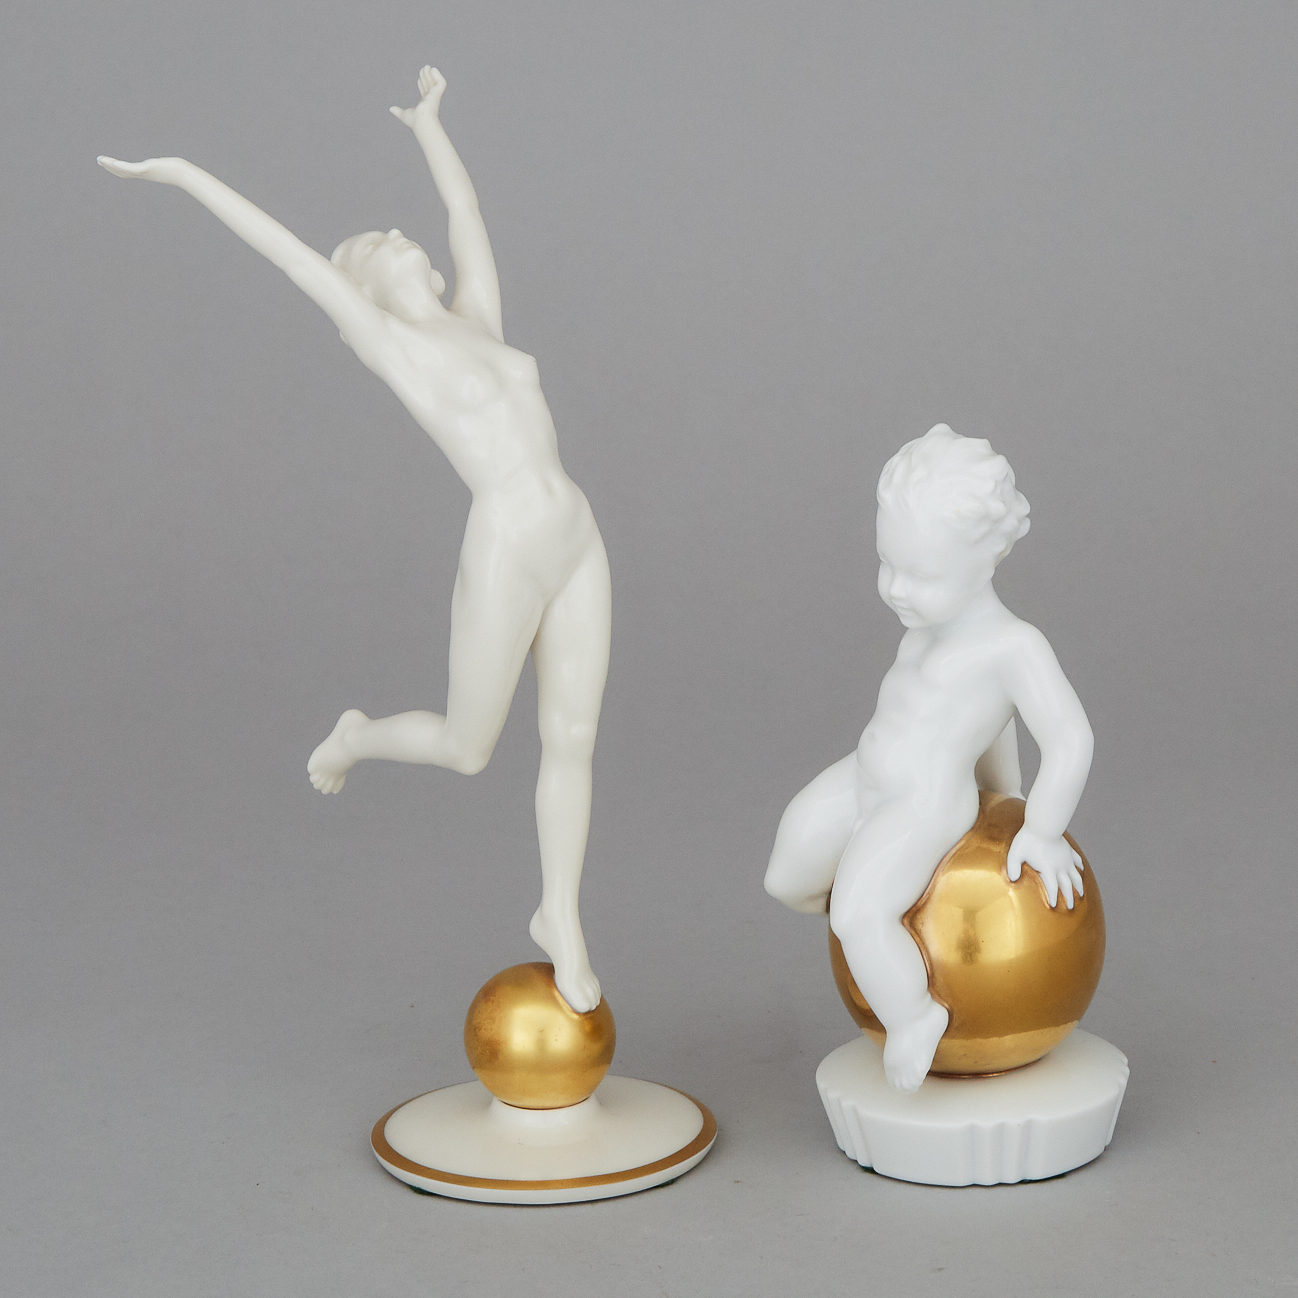 Hutschenreuther Nude Figure of a Woman and a Rosenthal Child, 20th century